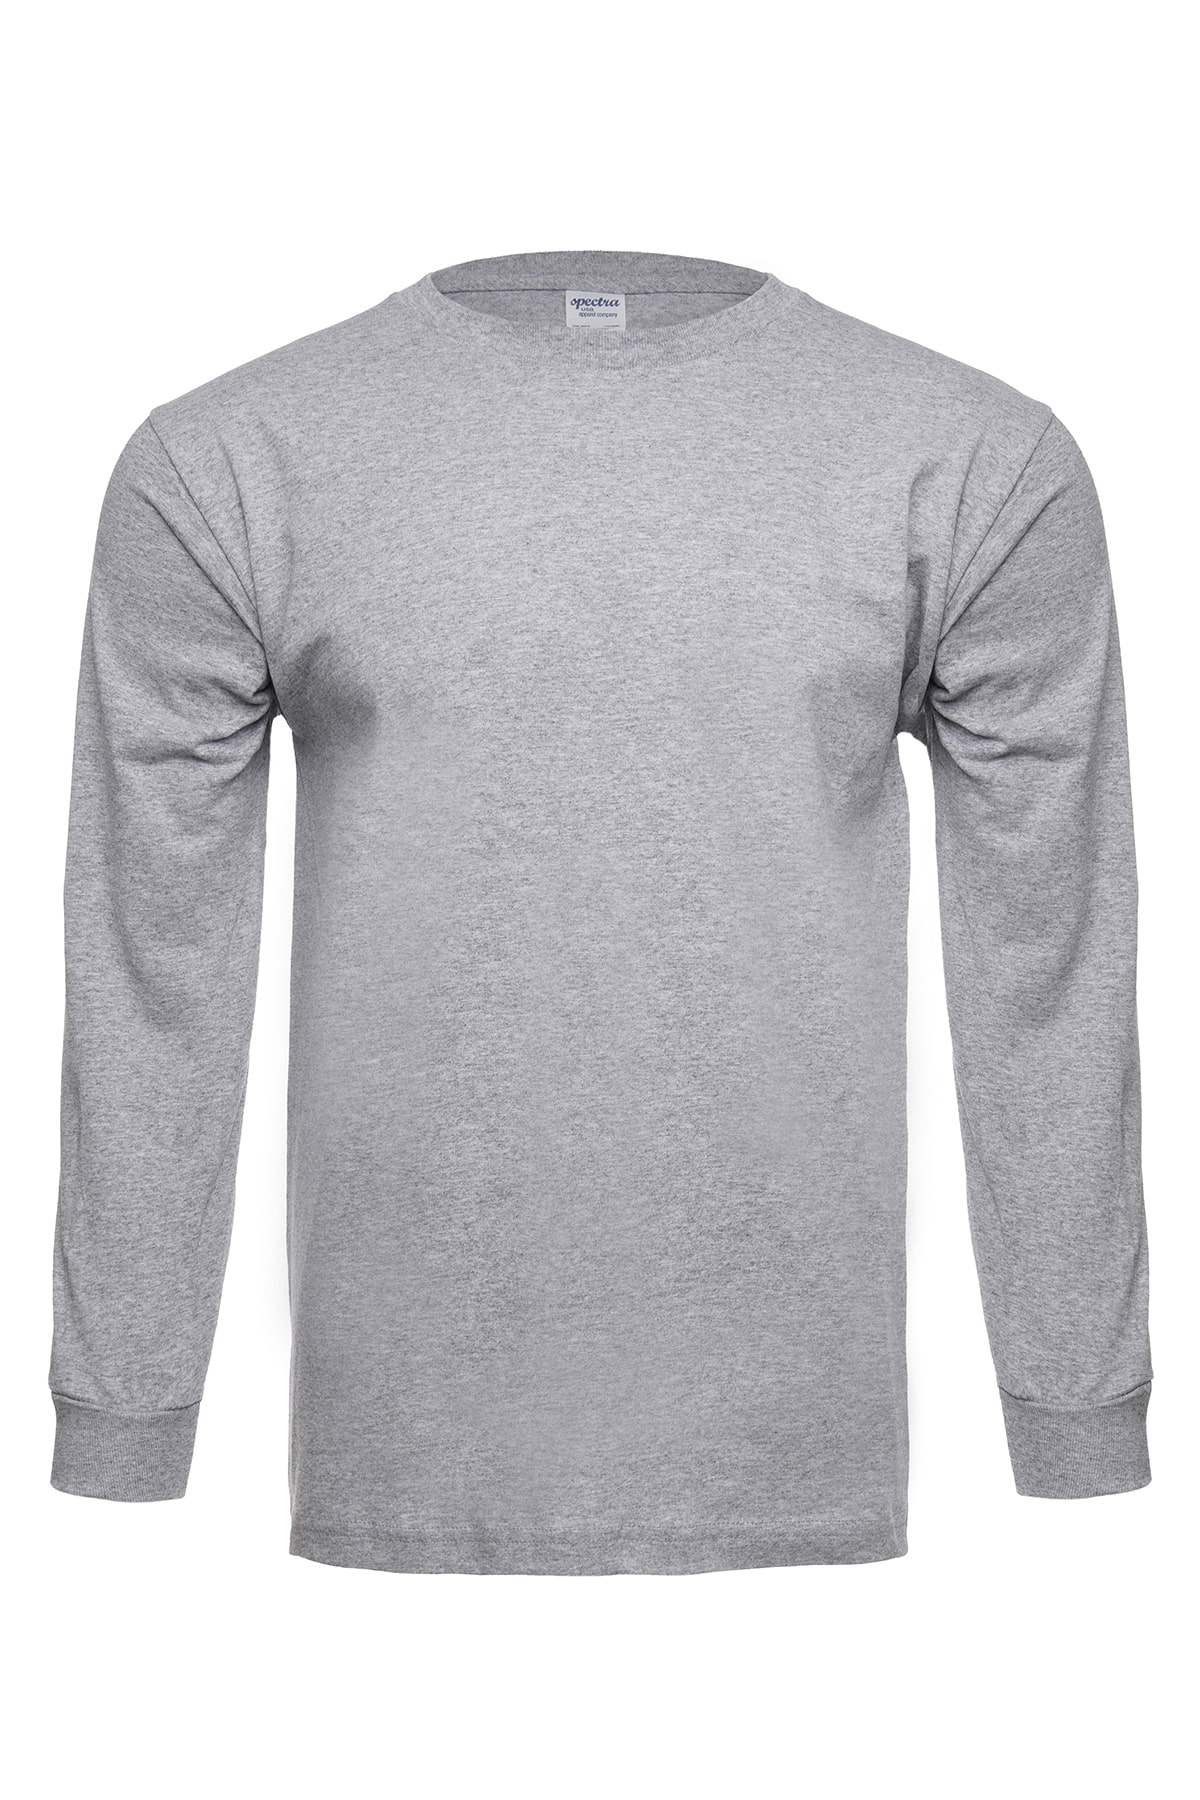 1304 Heather Grey Front Long Sleeve T-shirt